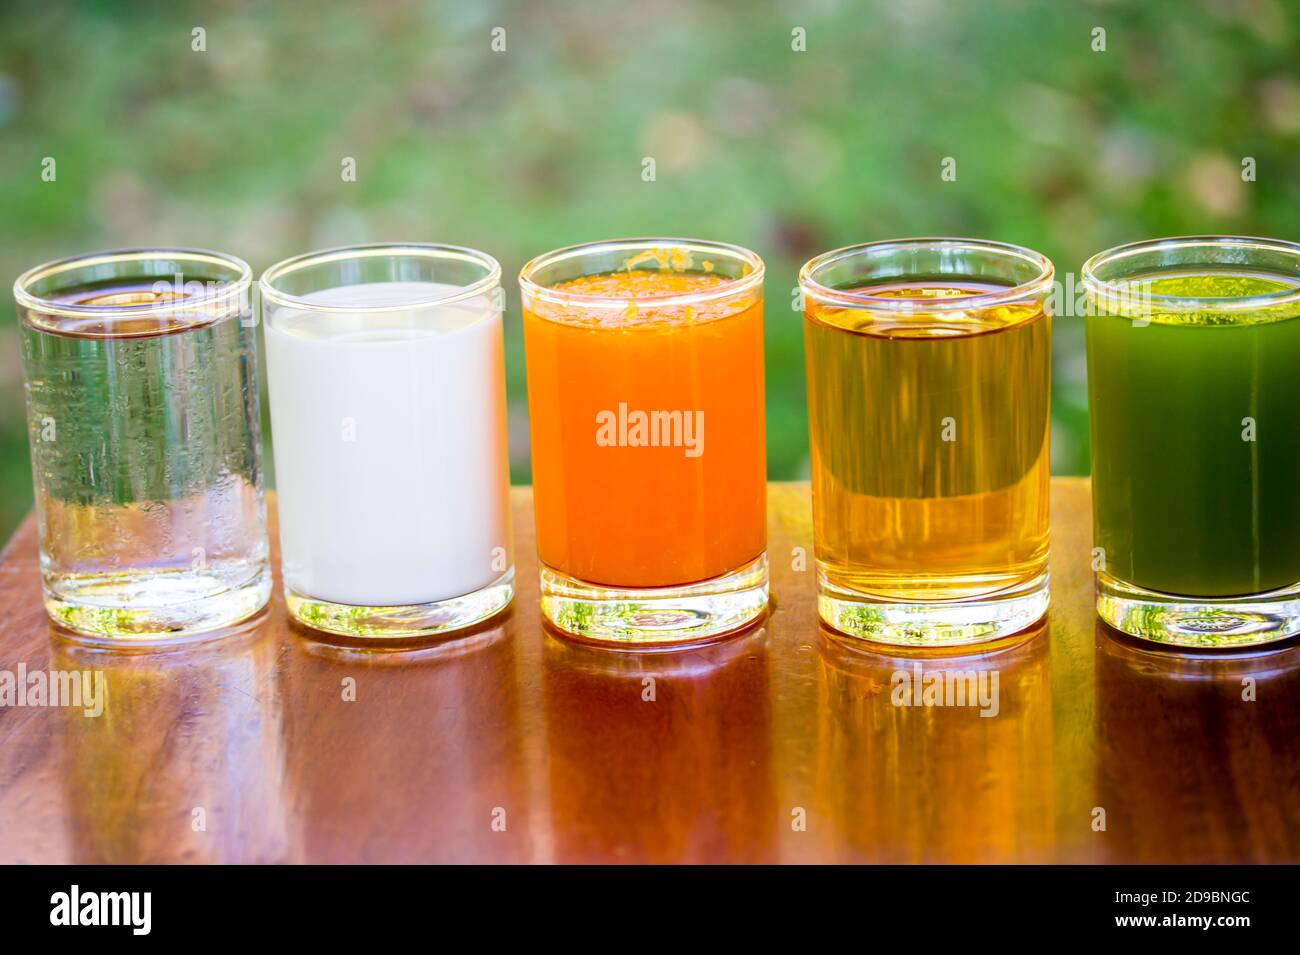 Fruit juices, orange juice, apple juice, kiwifruit juice,with milk and water in glass on the table. Stock Photo